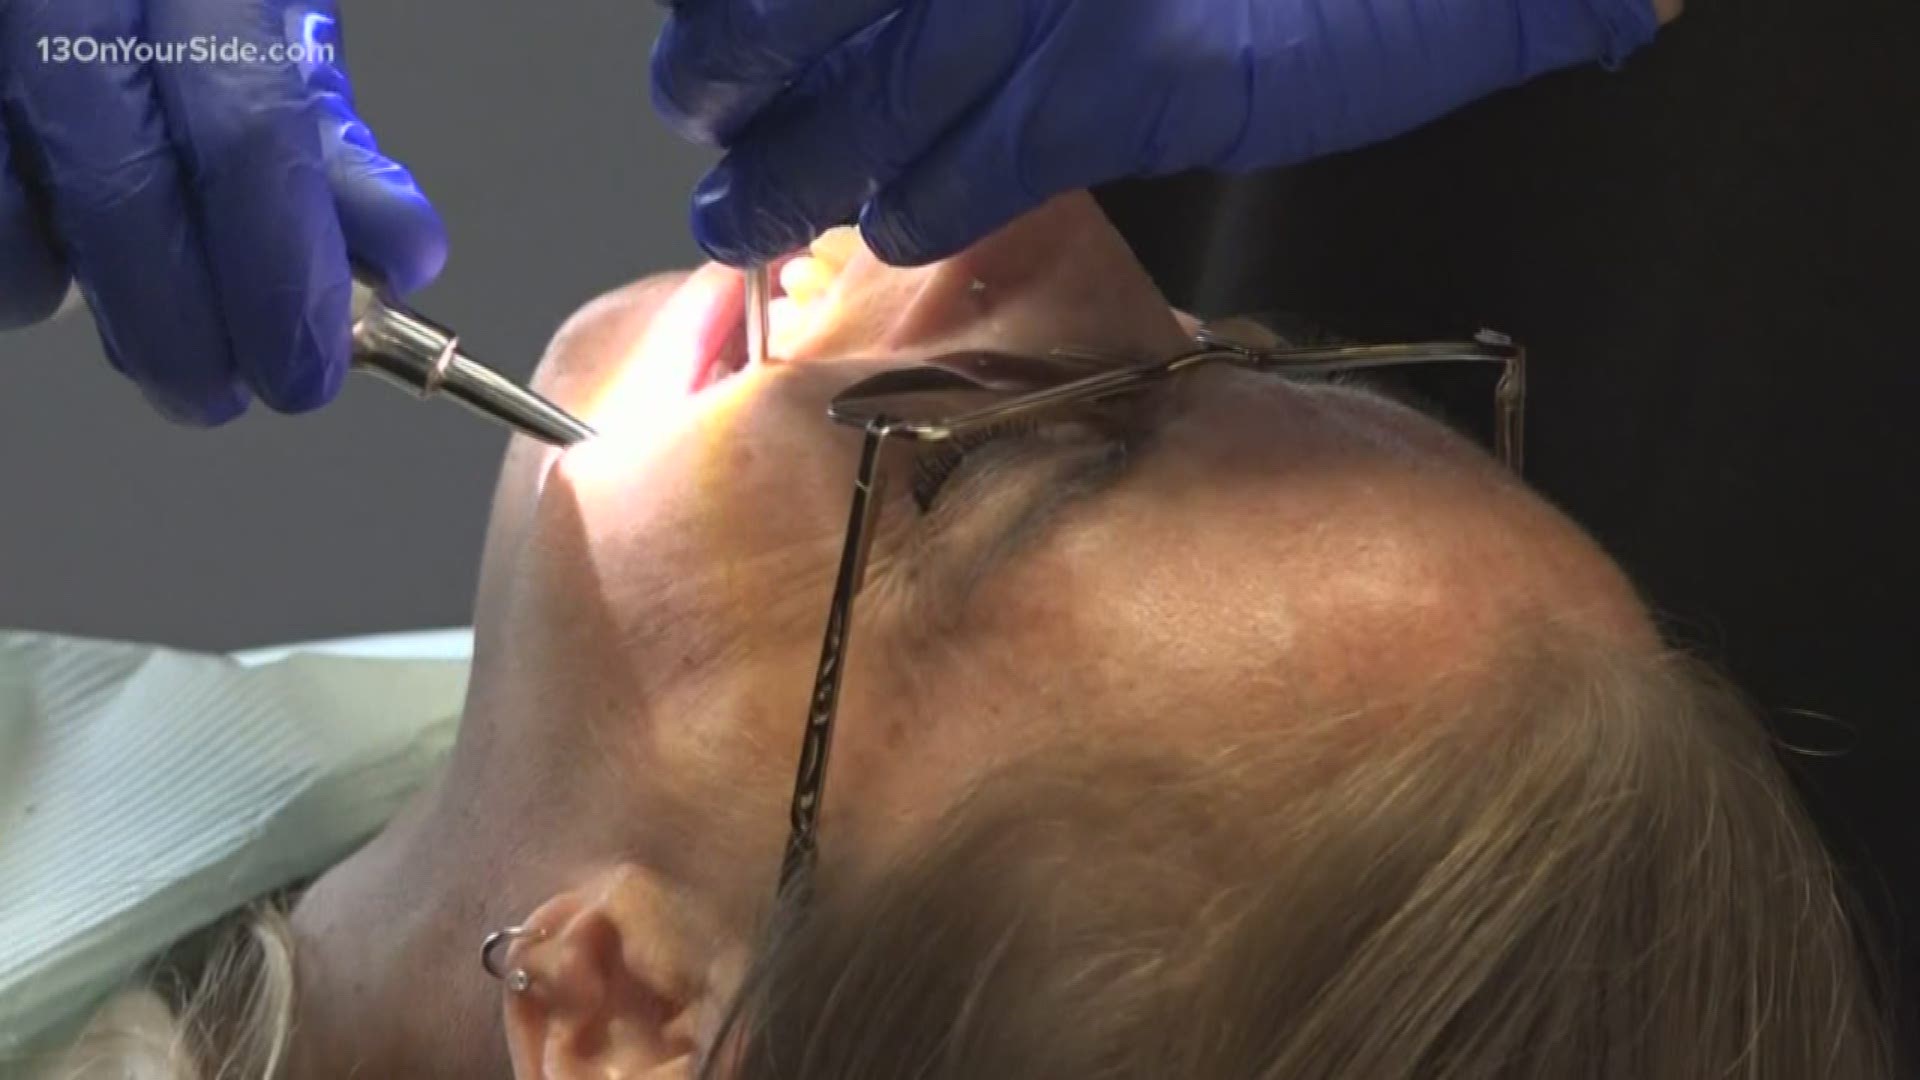 Lakeshore dentists offer free care day